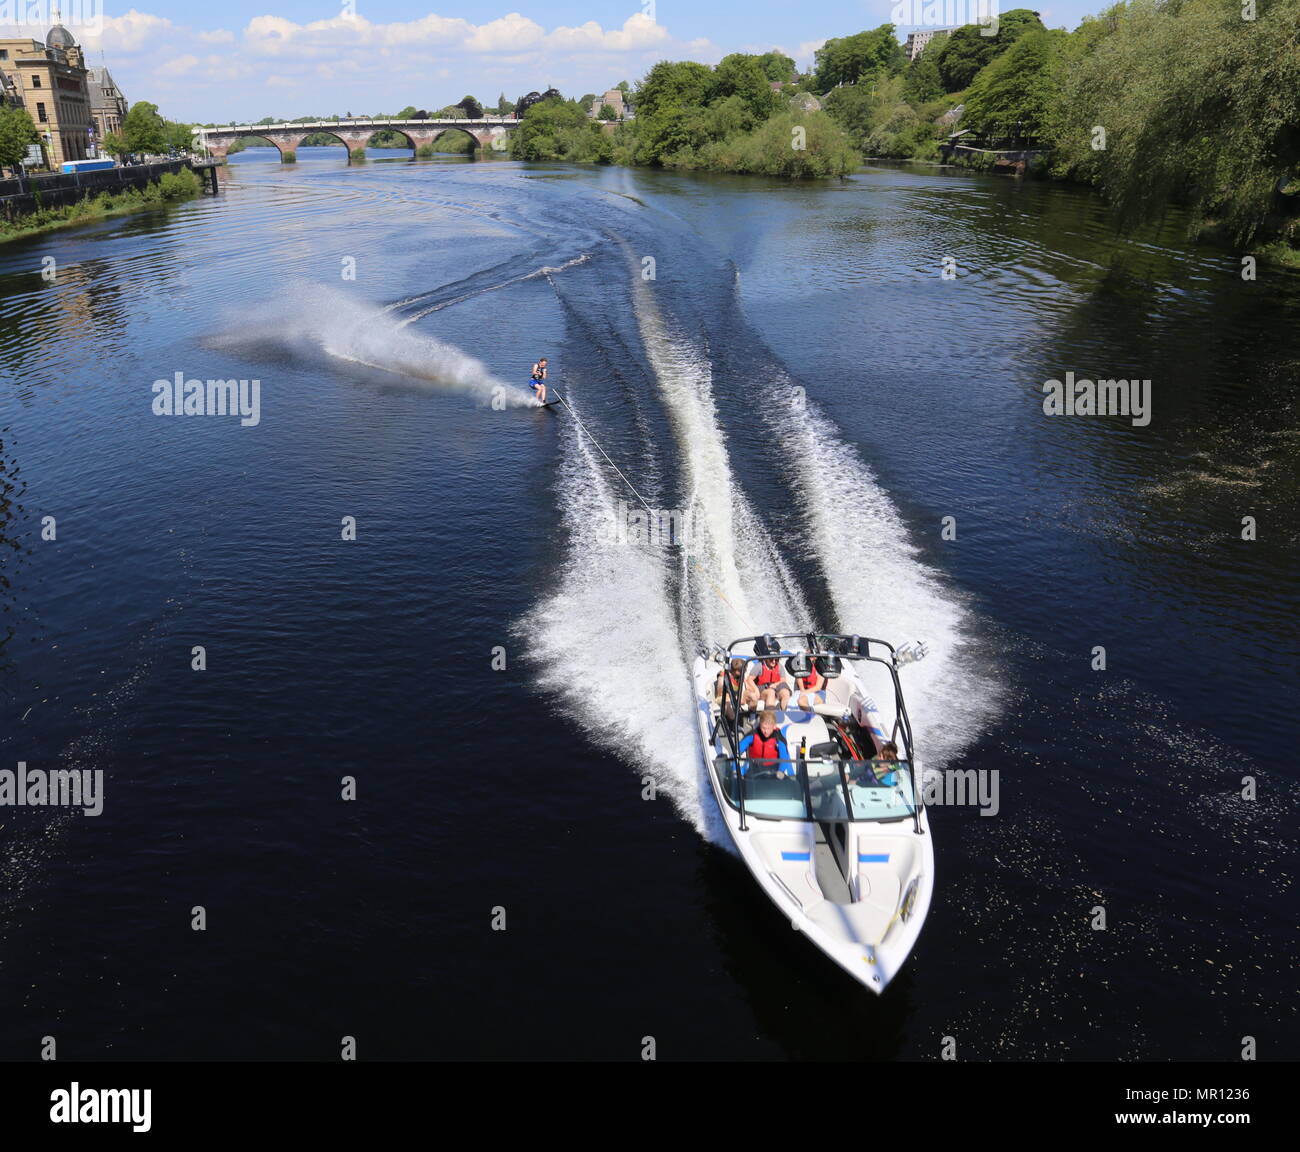 Perth, UK. 25th May 2018. On a very warm day in Scotland someone cools off by water-skiing on the River Tay in Perth.  © Stephen Finn/Alamy Live News Stock Photo